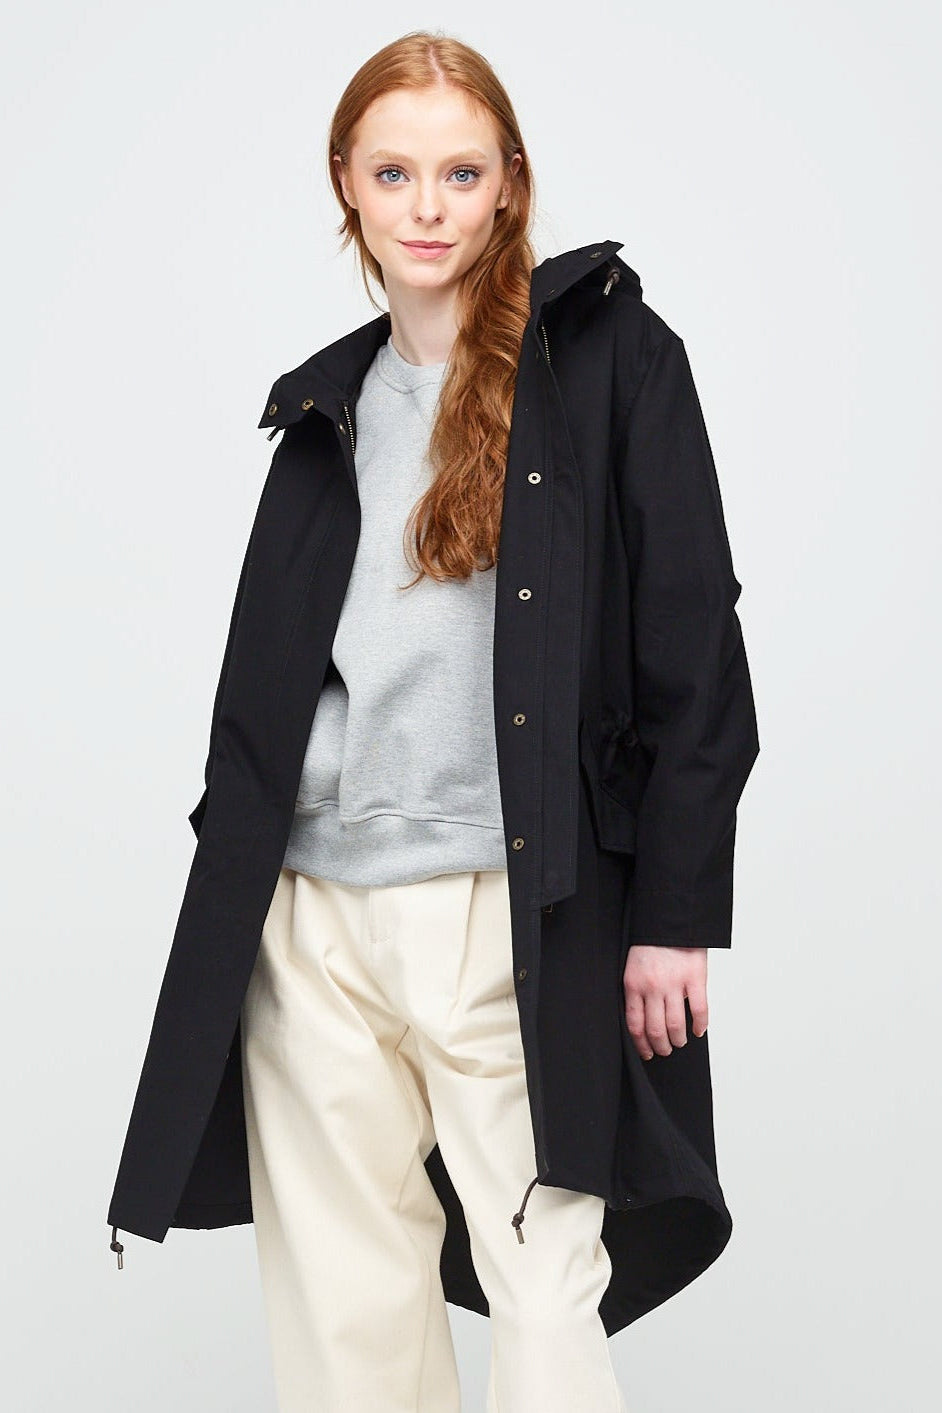 
            A young, white female model with ginger hair wearing long black parka unzipped. The parka is styled with a grey sweatshirt, ecru jeans and a white trainer.